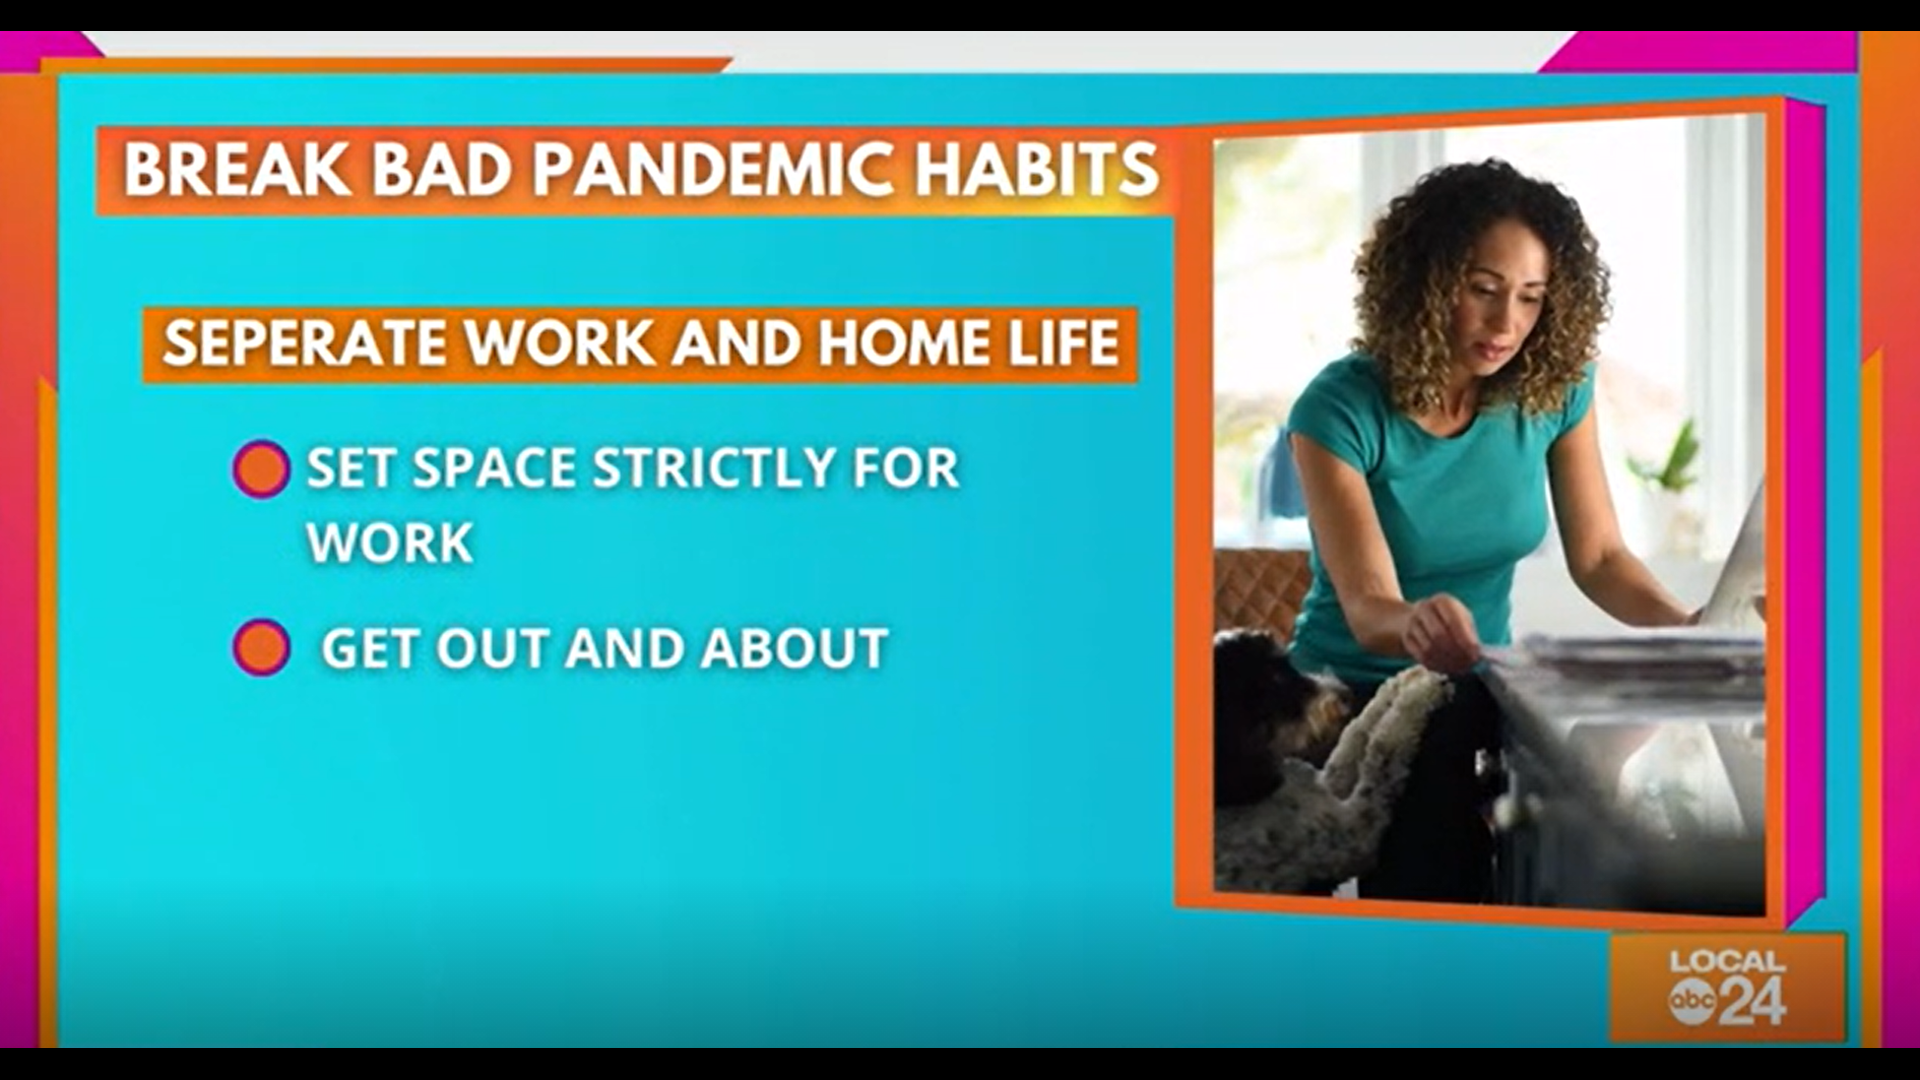 There's no question that the covid19 pandemic has created some not-so healthy habits. Join Sydney Neely for tips and tricks on how to break bad pandemic habits!